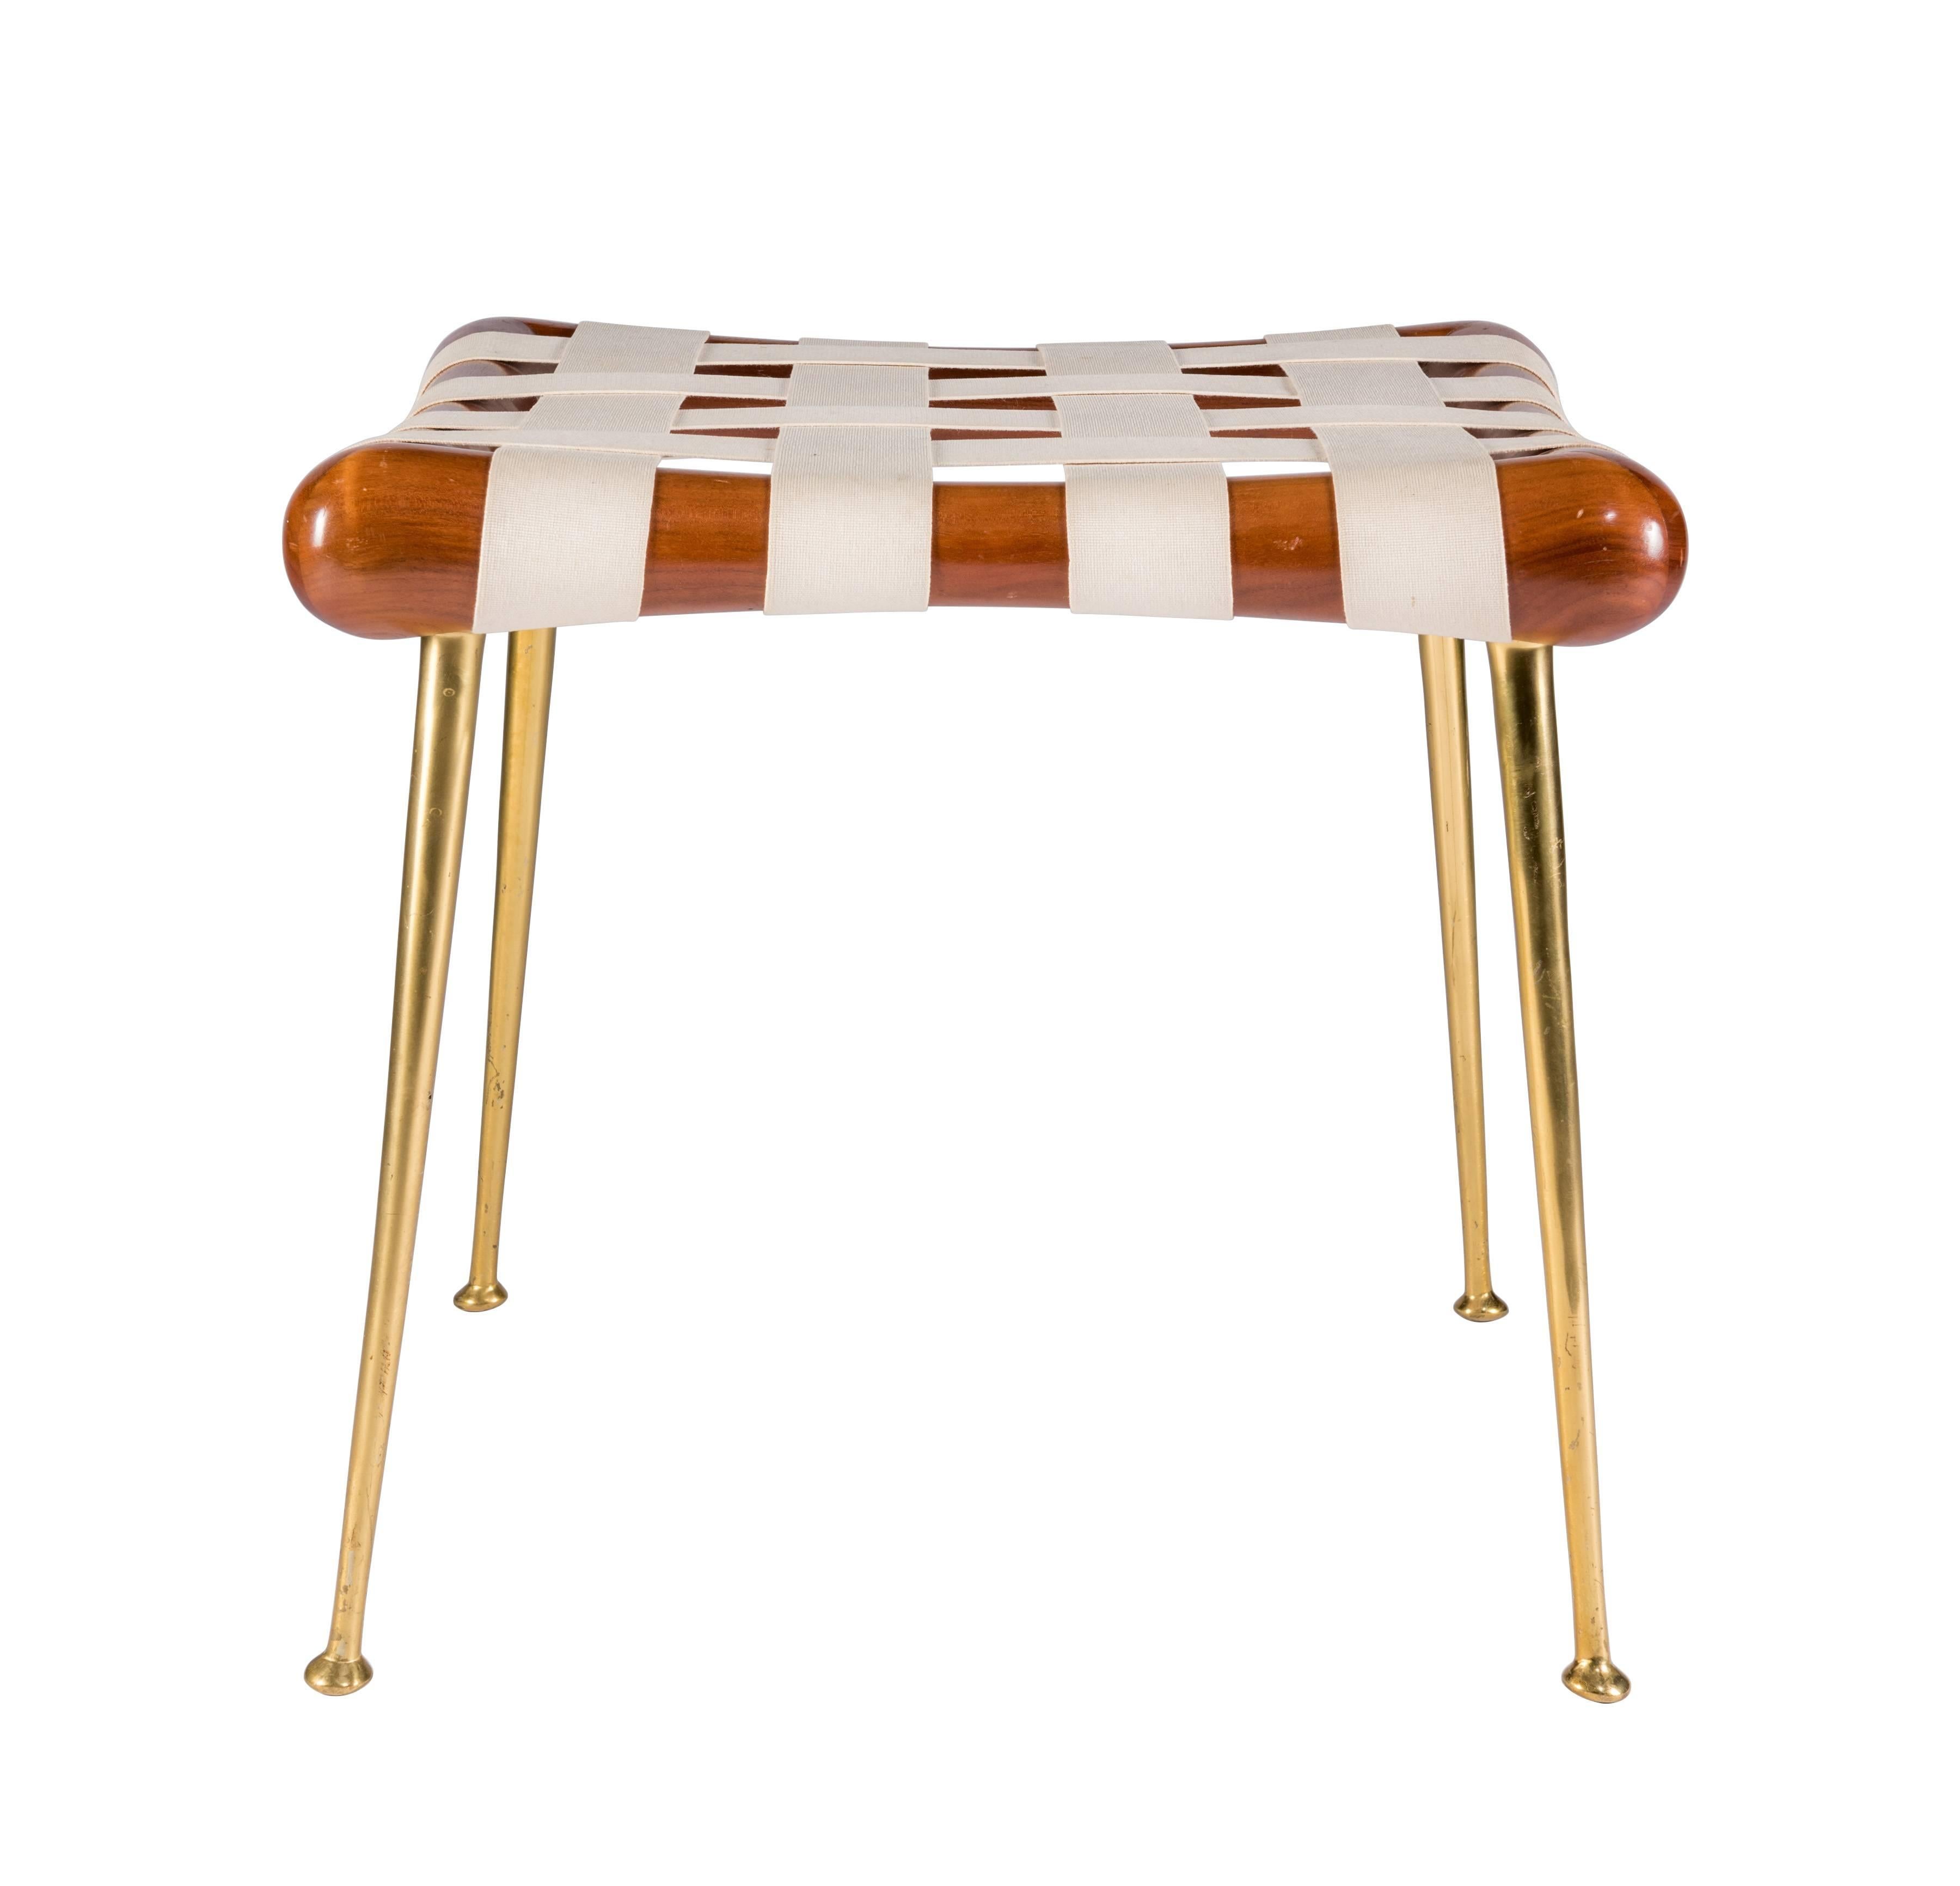 A rare and elegant stool designed by T.H. Robsjohn-Gibbings in 1957. This very clean example was manufactured by Widdicomb for a short time and features a walnut frame atop tapered brass legs. Model No. 1730.
        